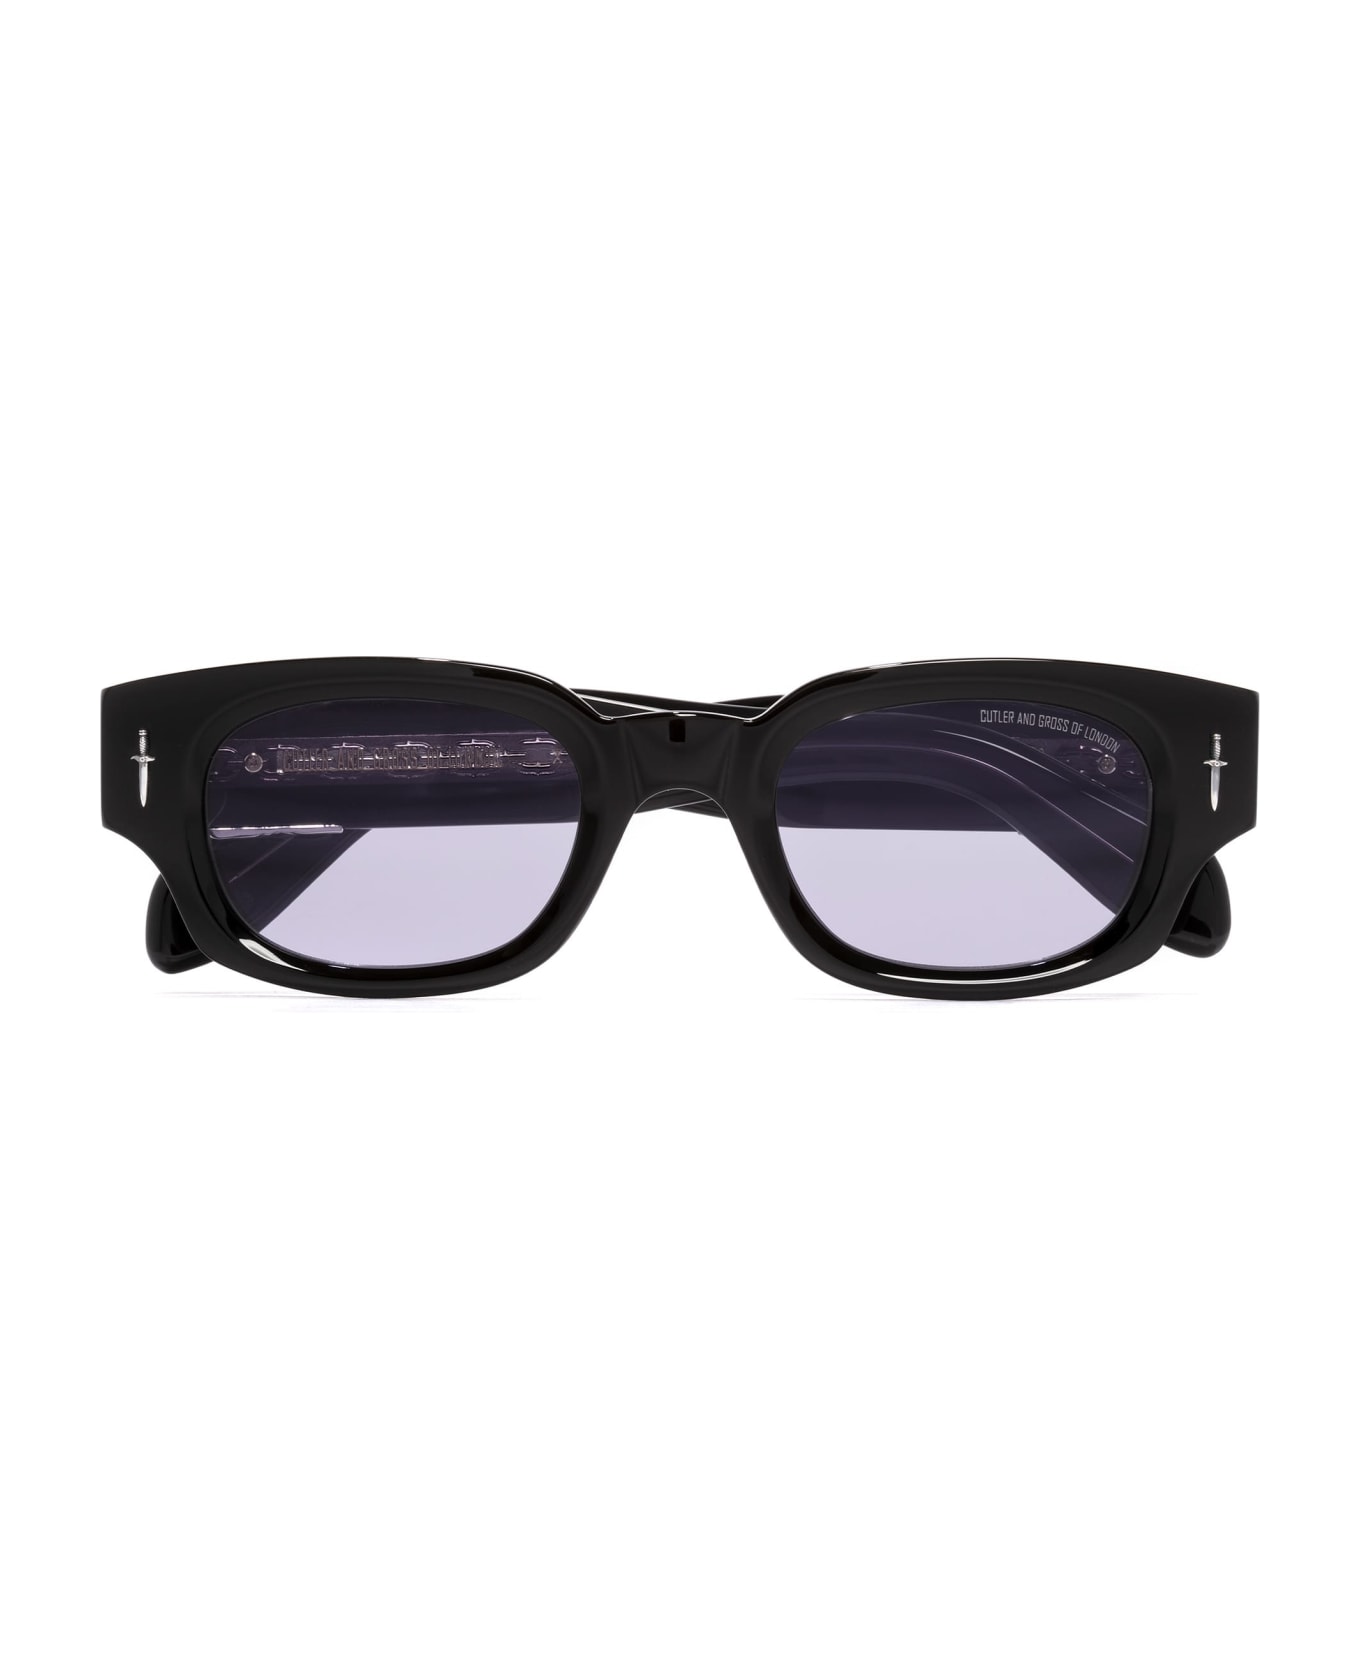 Cutler and Gross The Great Frog - Soaring Eagle / Black Sunglasses - Black サングラス